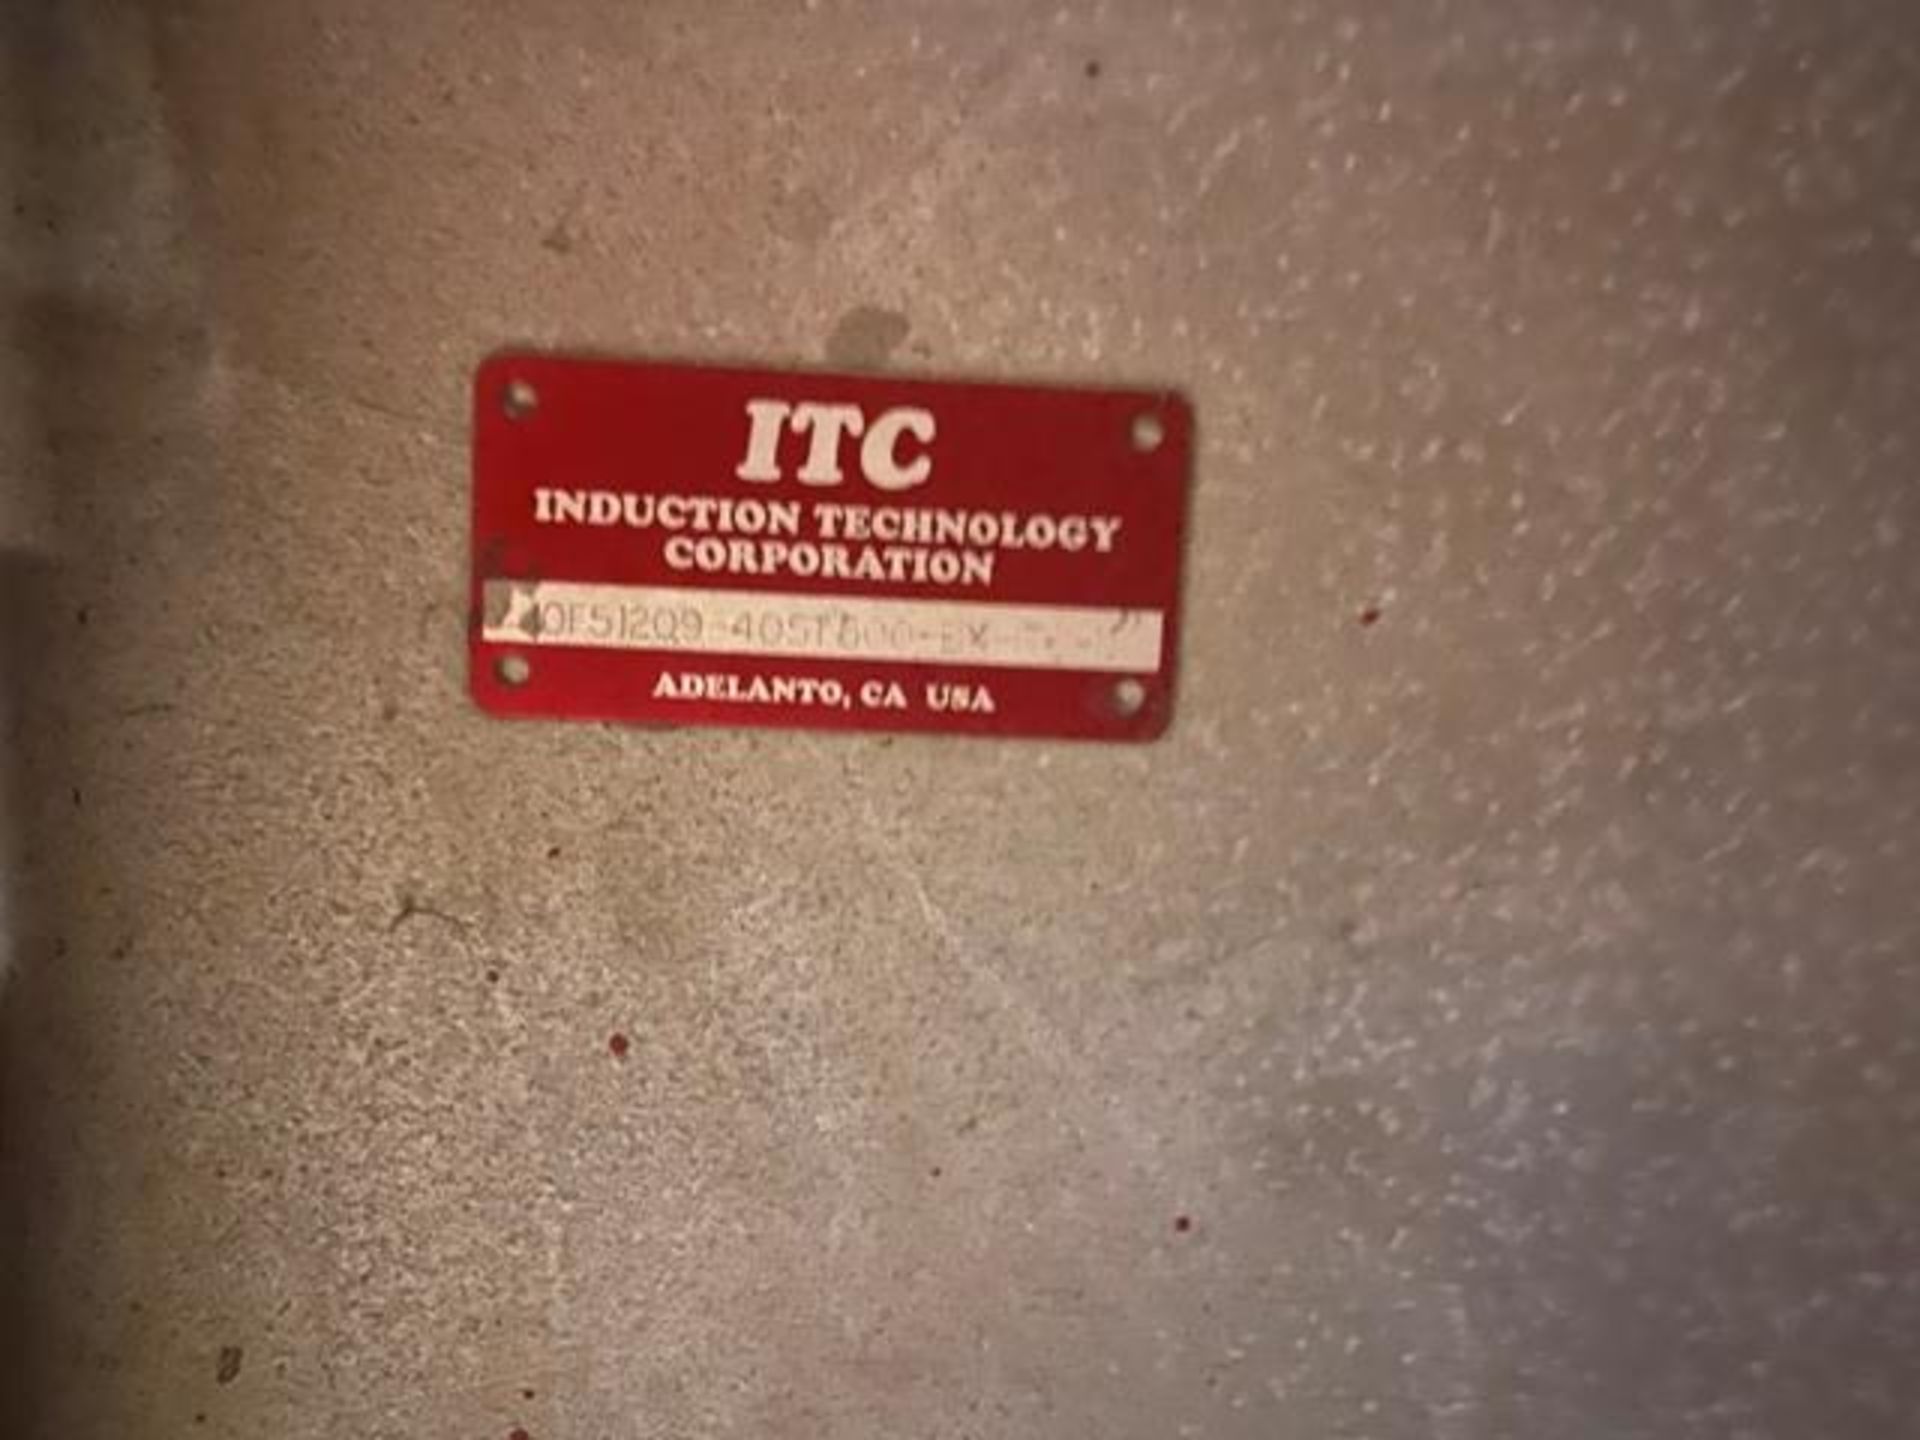 ITC Induction Furnace Rigging Price $175 - Image 4 of 4